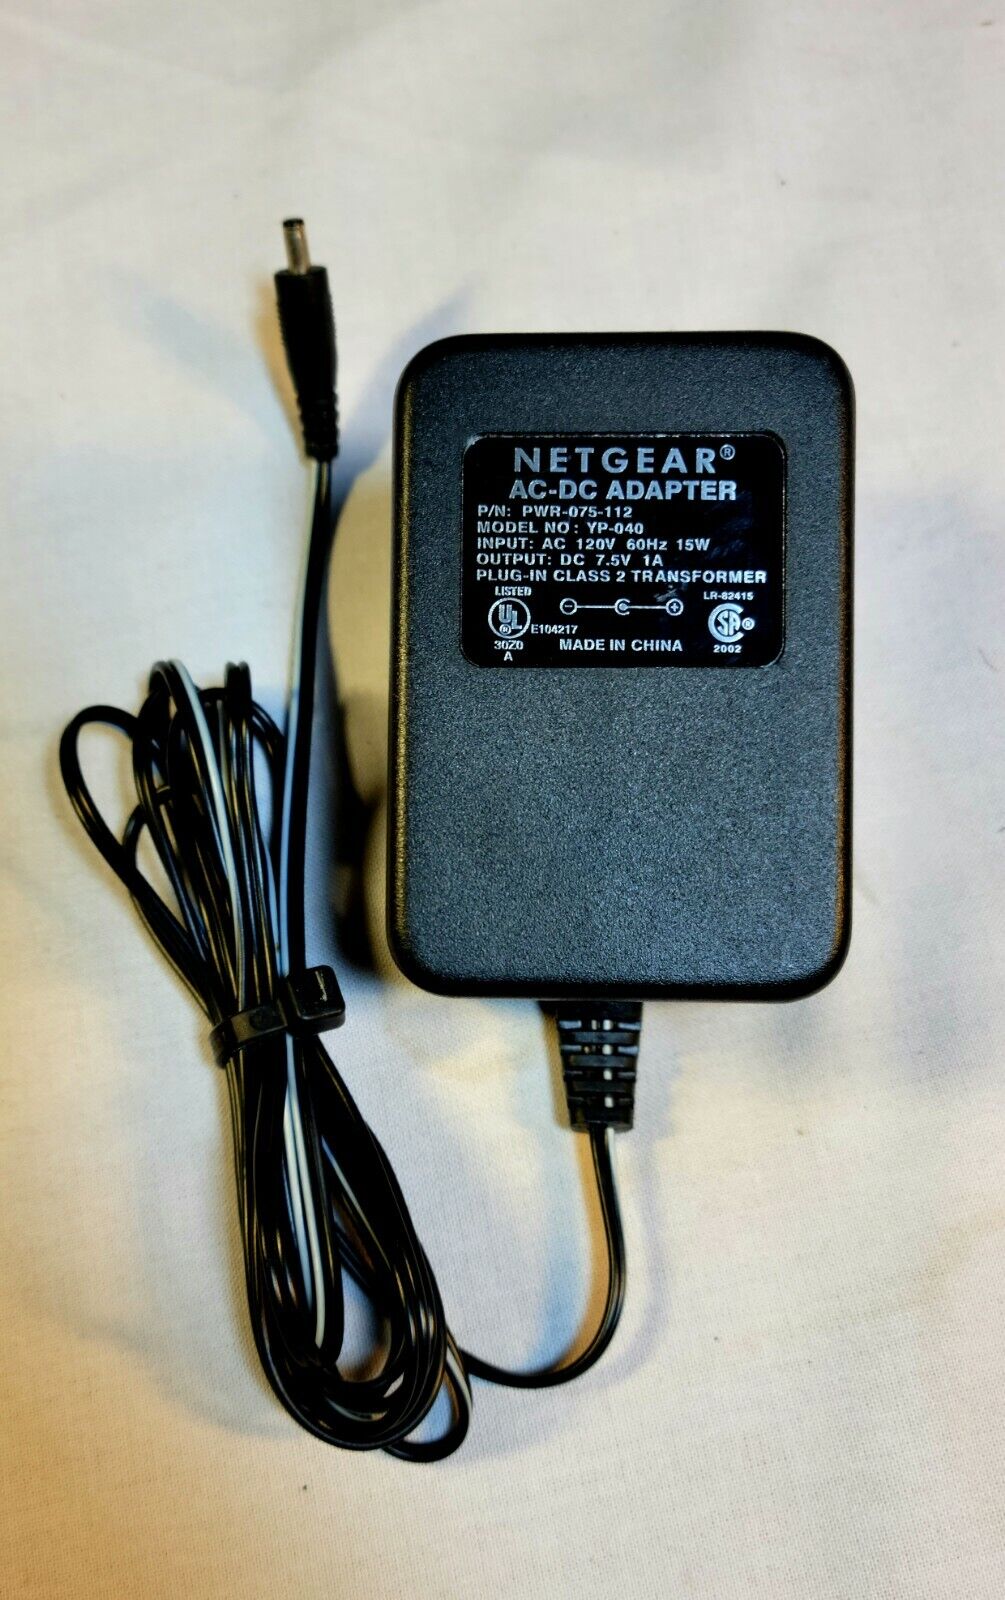 *Brand NEW*Netgear AC-DC Adapter PWR-075-112 YP-040 Transformer Class 2 TESTED 7.5V 1A 15W AC DC ADAPTE POWER - Click Image to Close